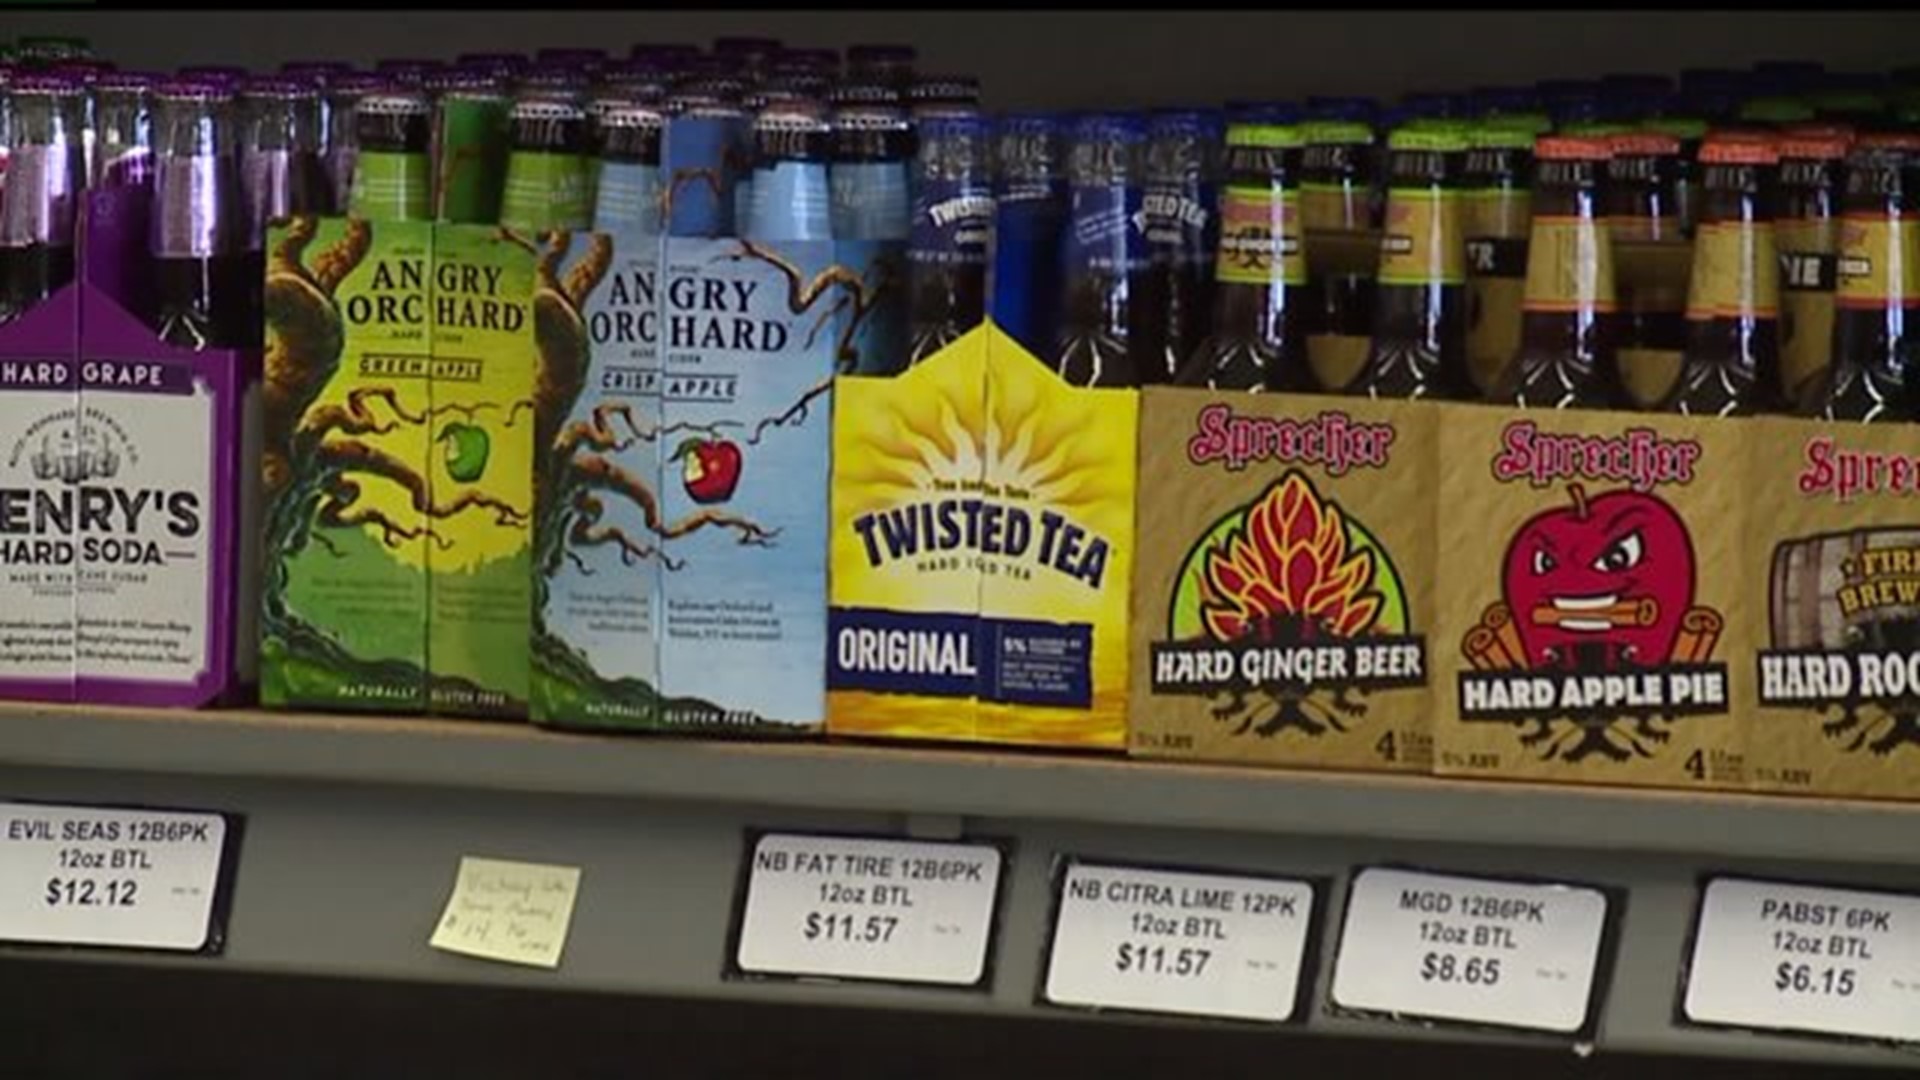 2017 beer law impacts York County businesses selling singles, six-packs